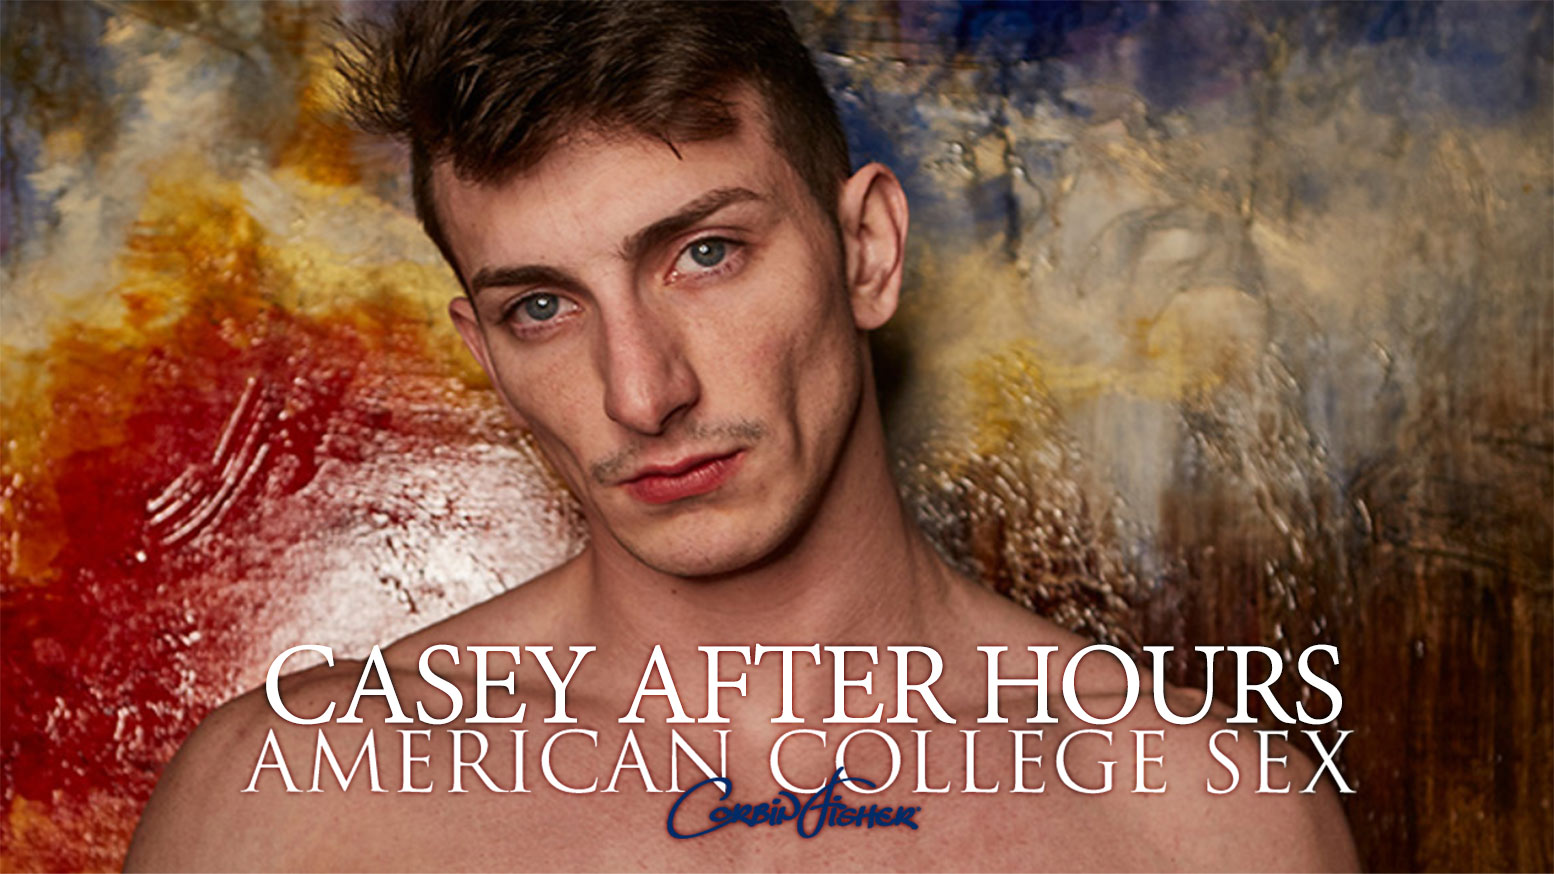 American College Sex Casey After Hours image